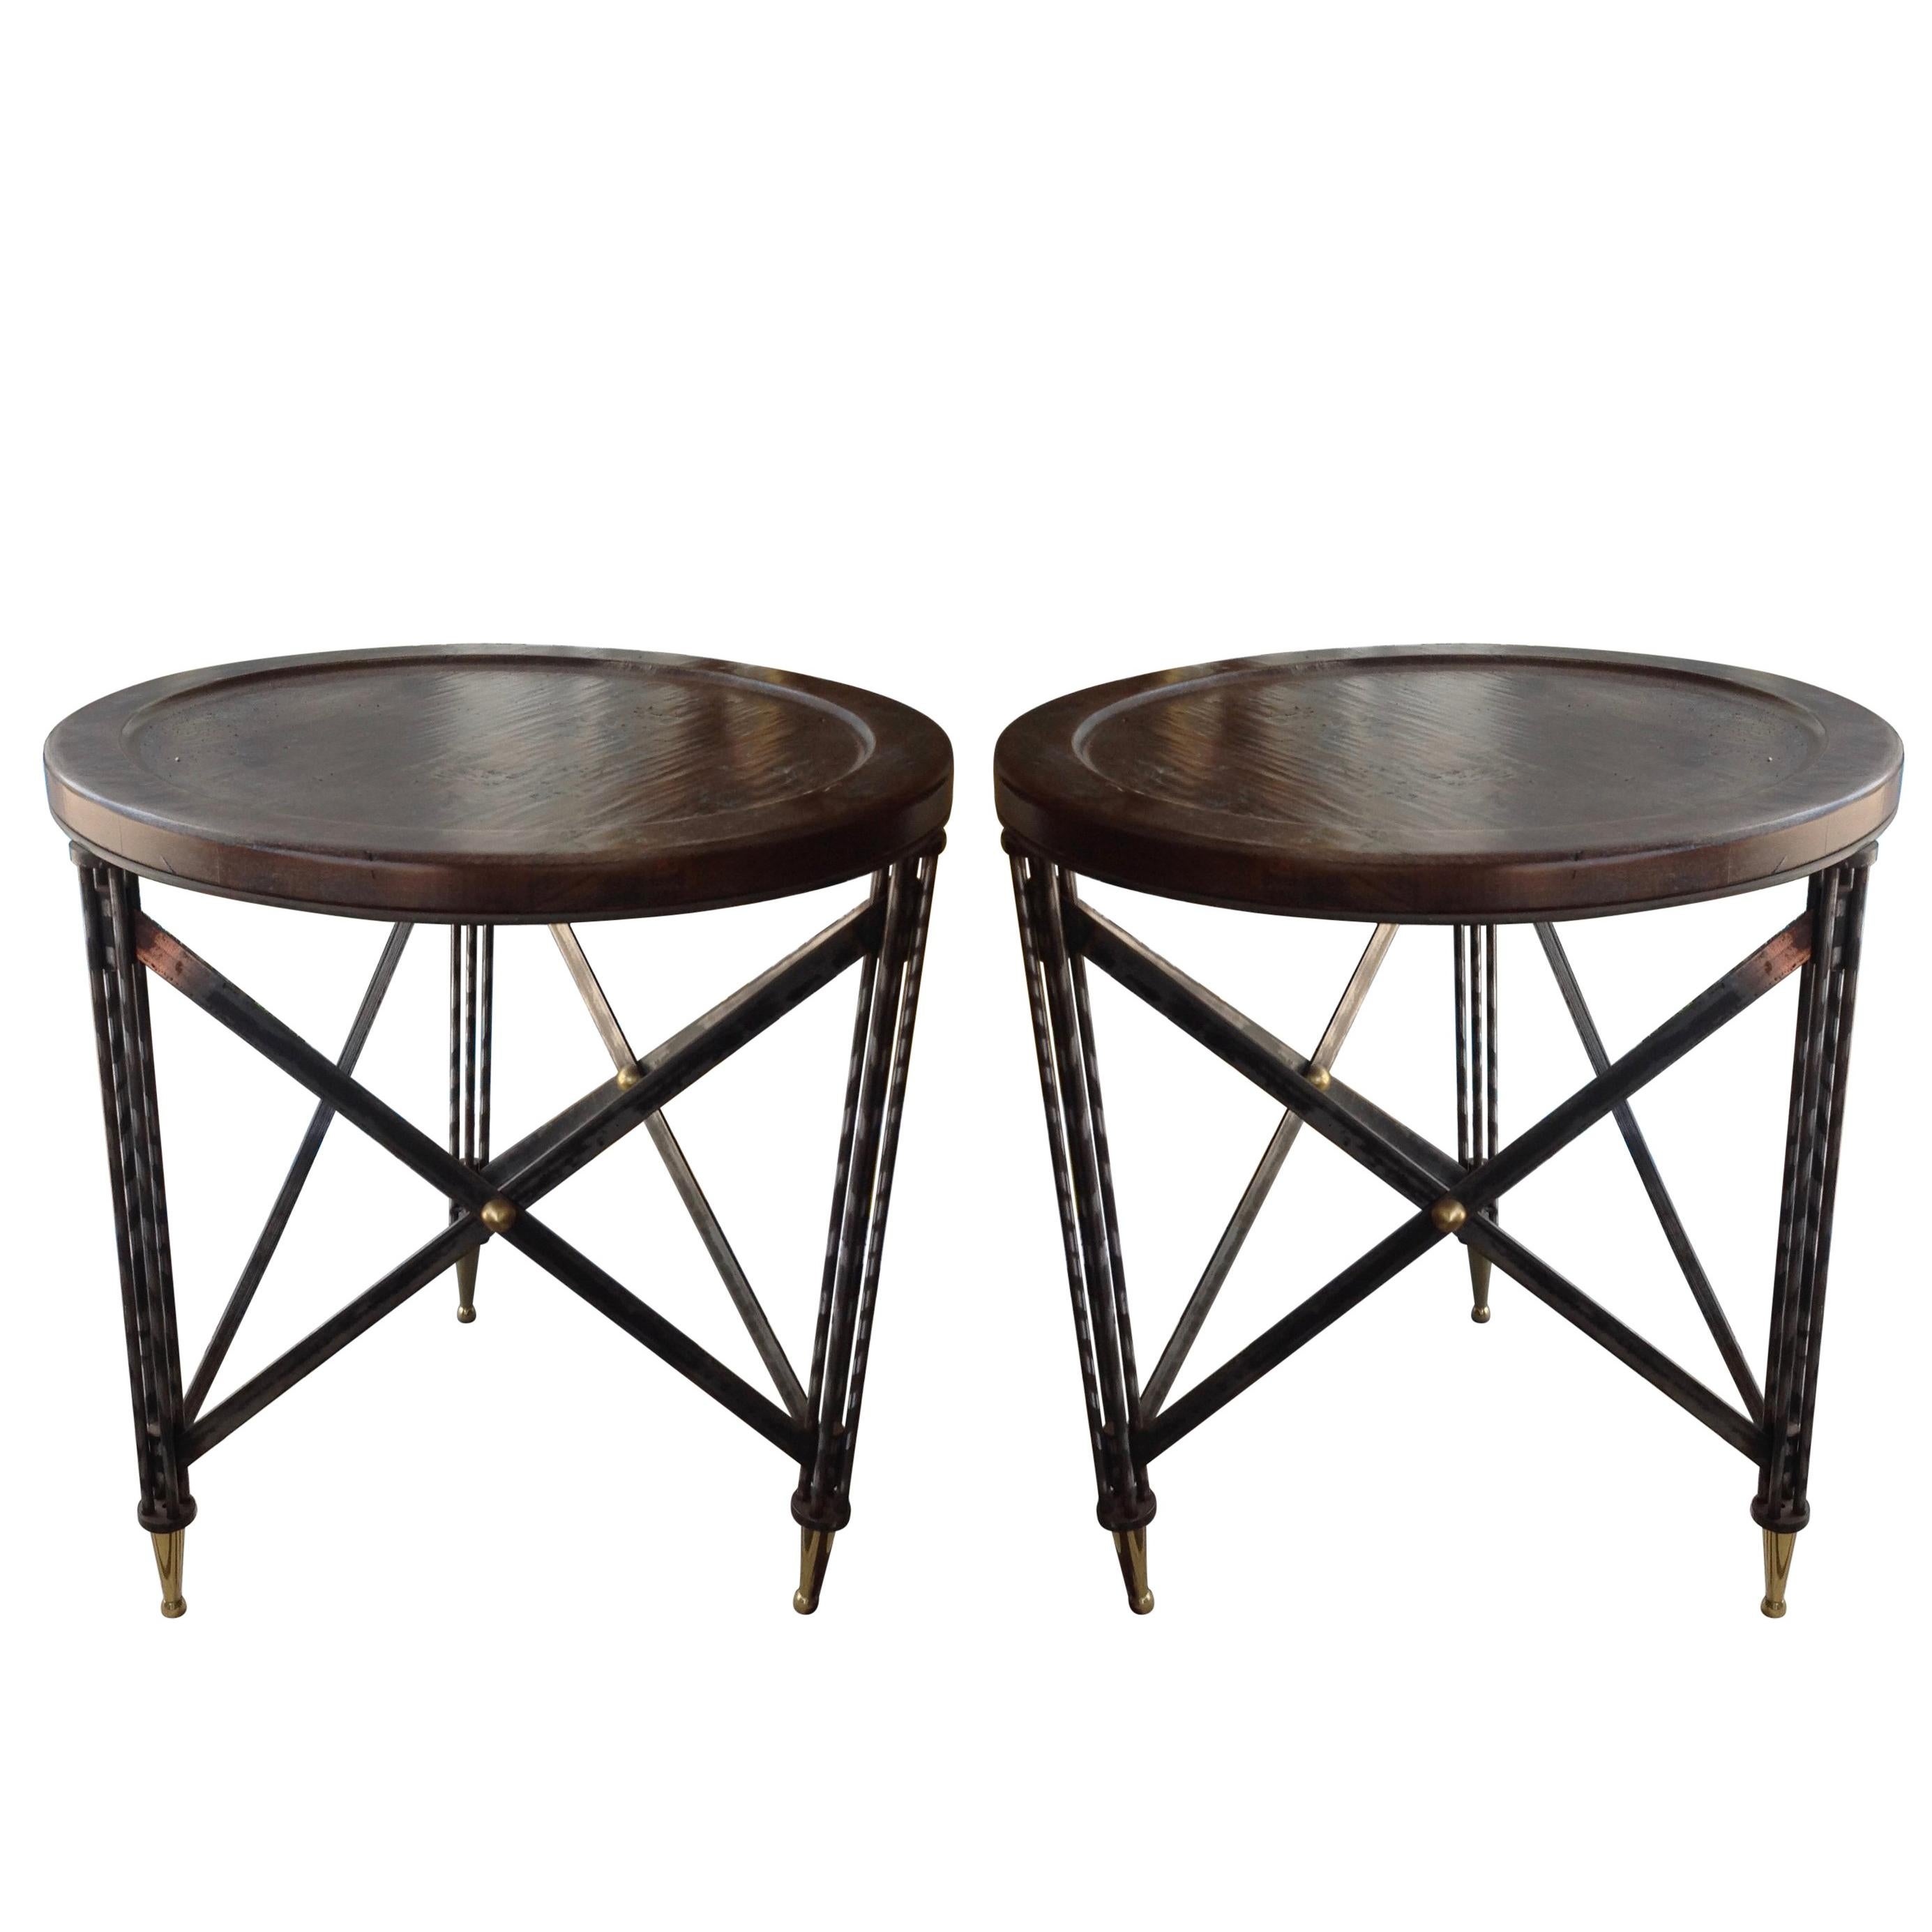  Pair of  "Campaign" Inspired Midcentury End Tables